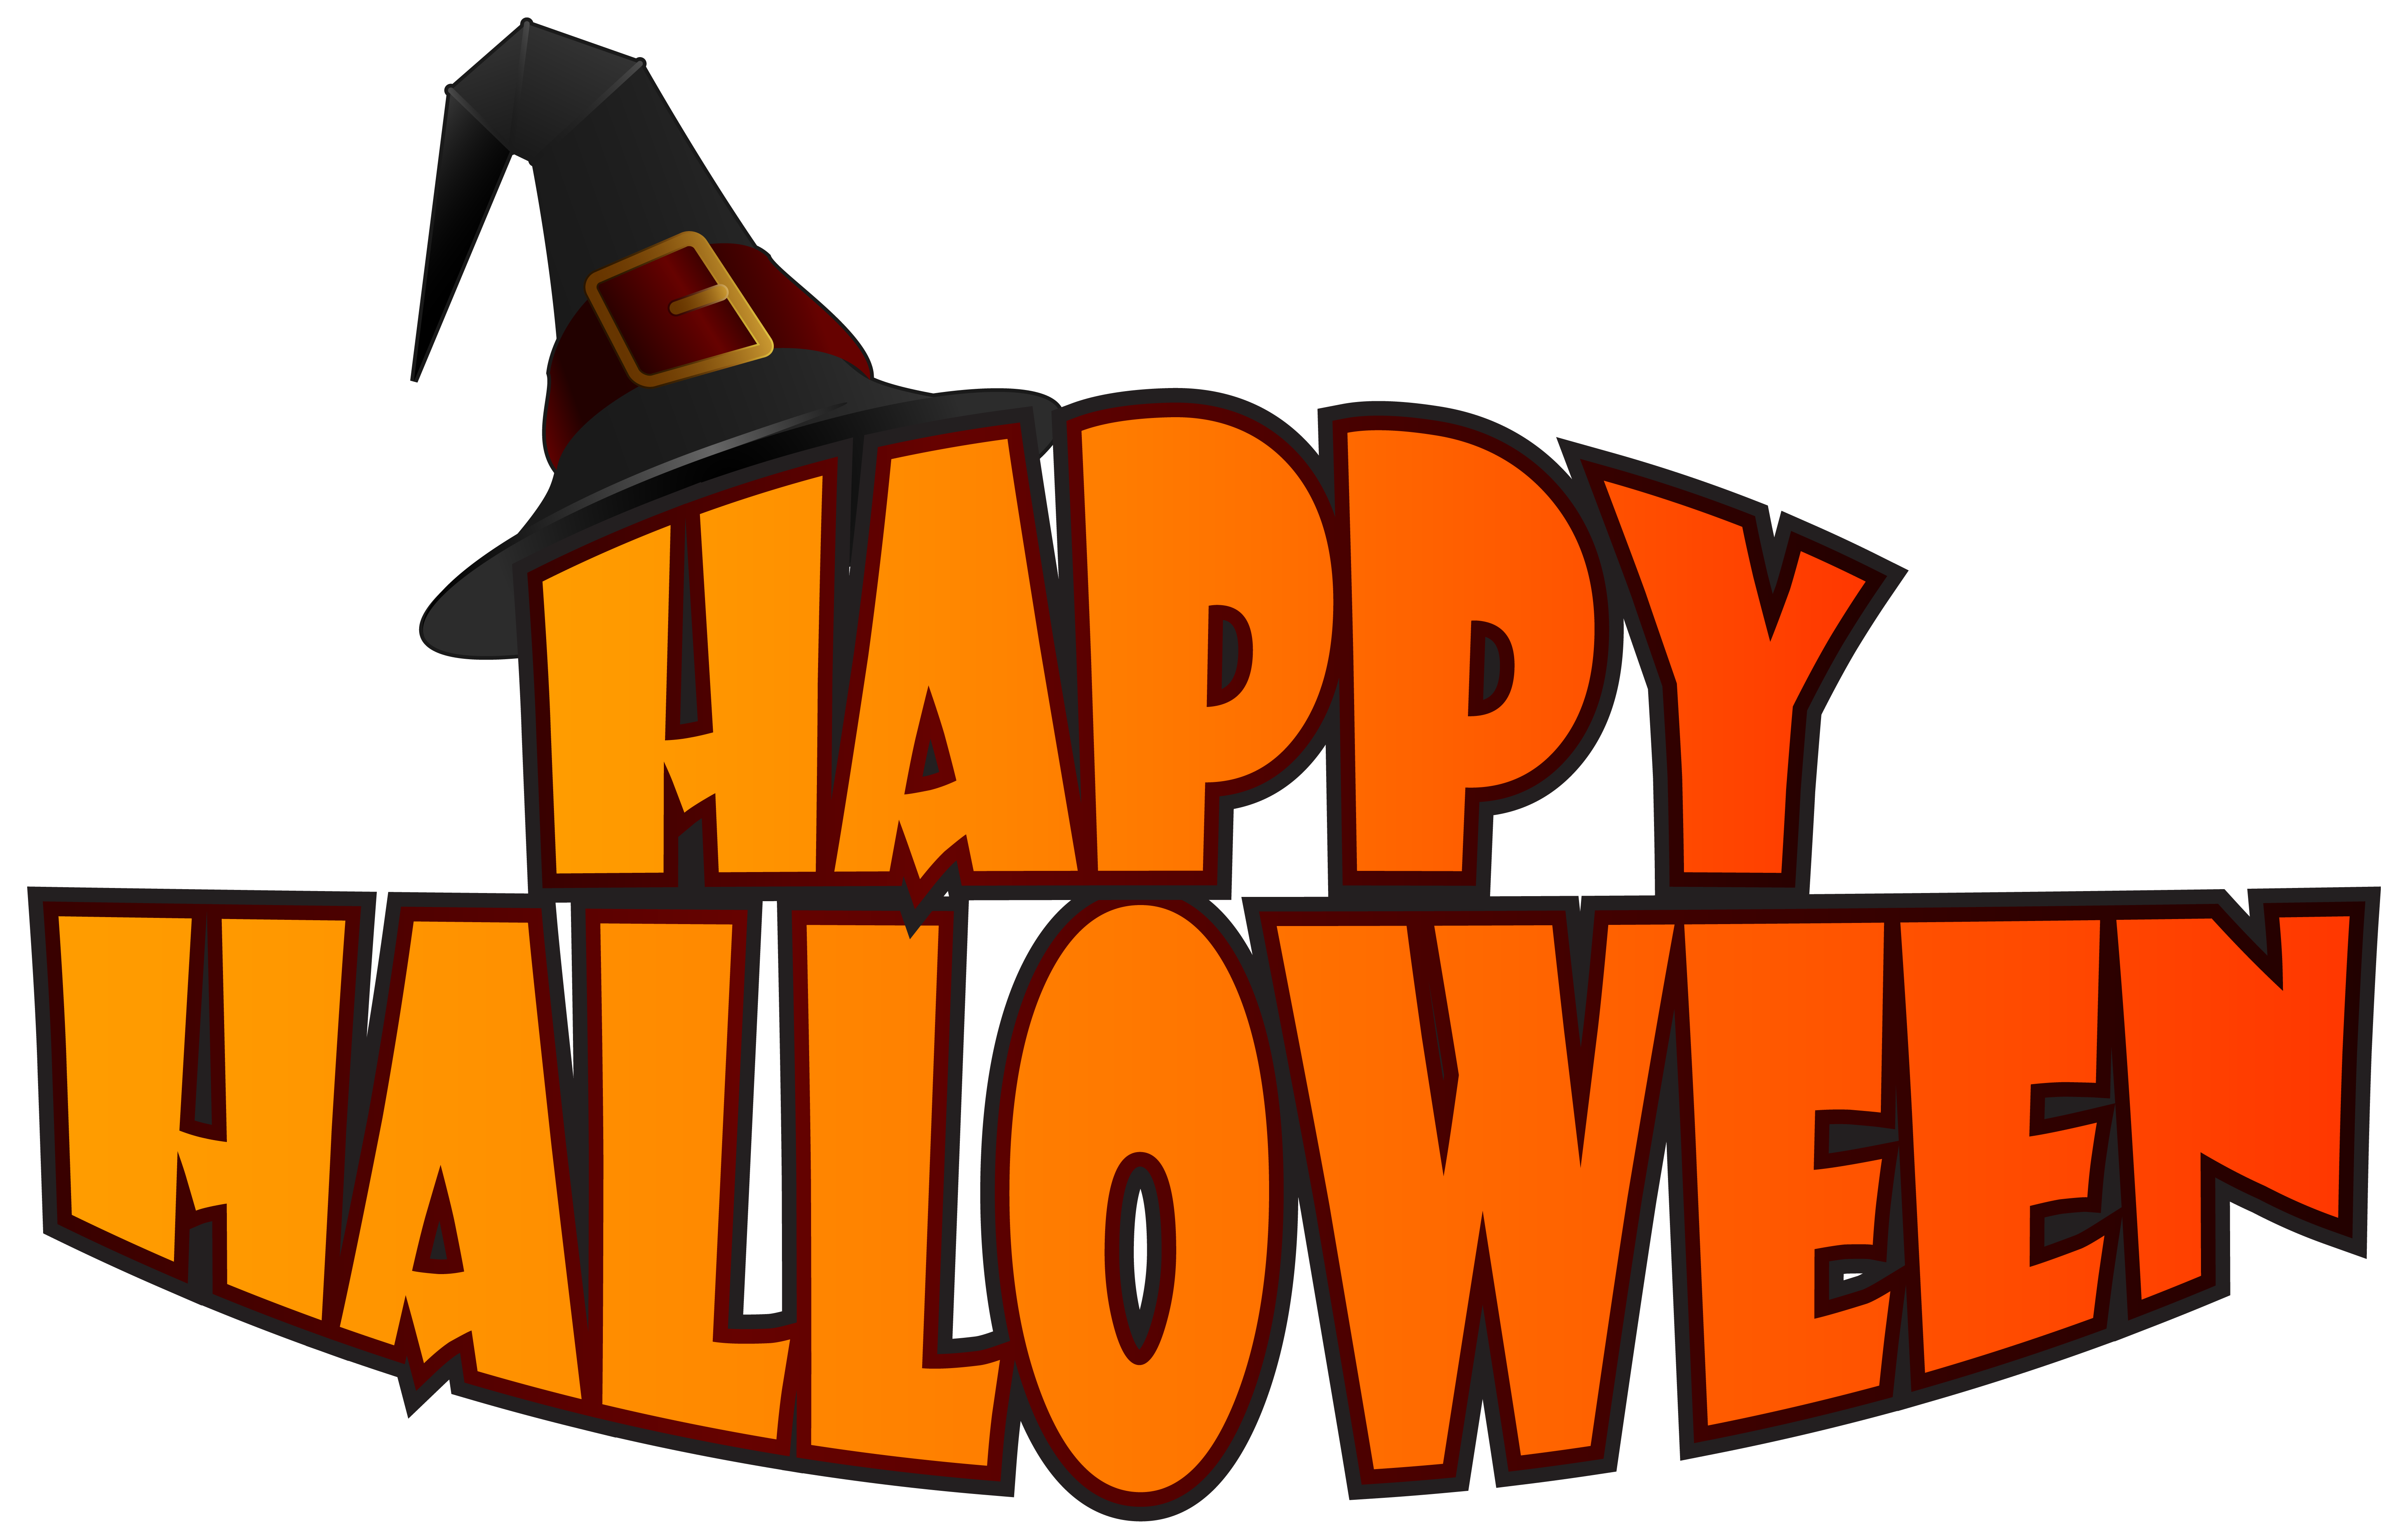 Happy Halloween With Witch Hat PNG Clipart Image Quality Image And Transparent PNG Free Clipart